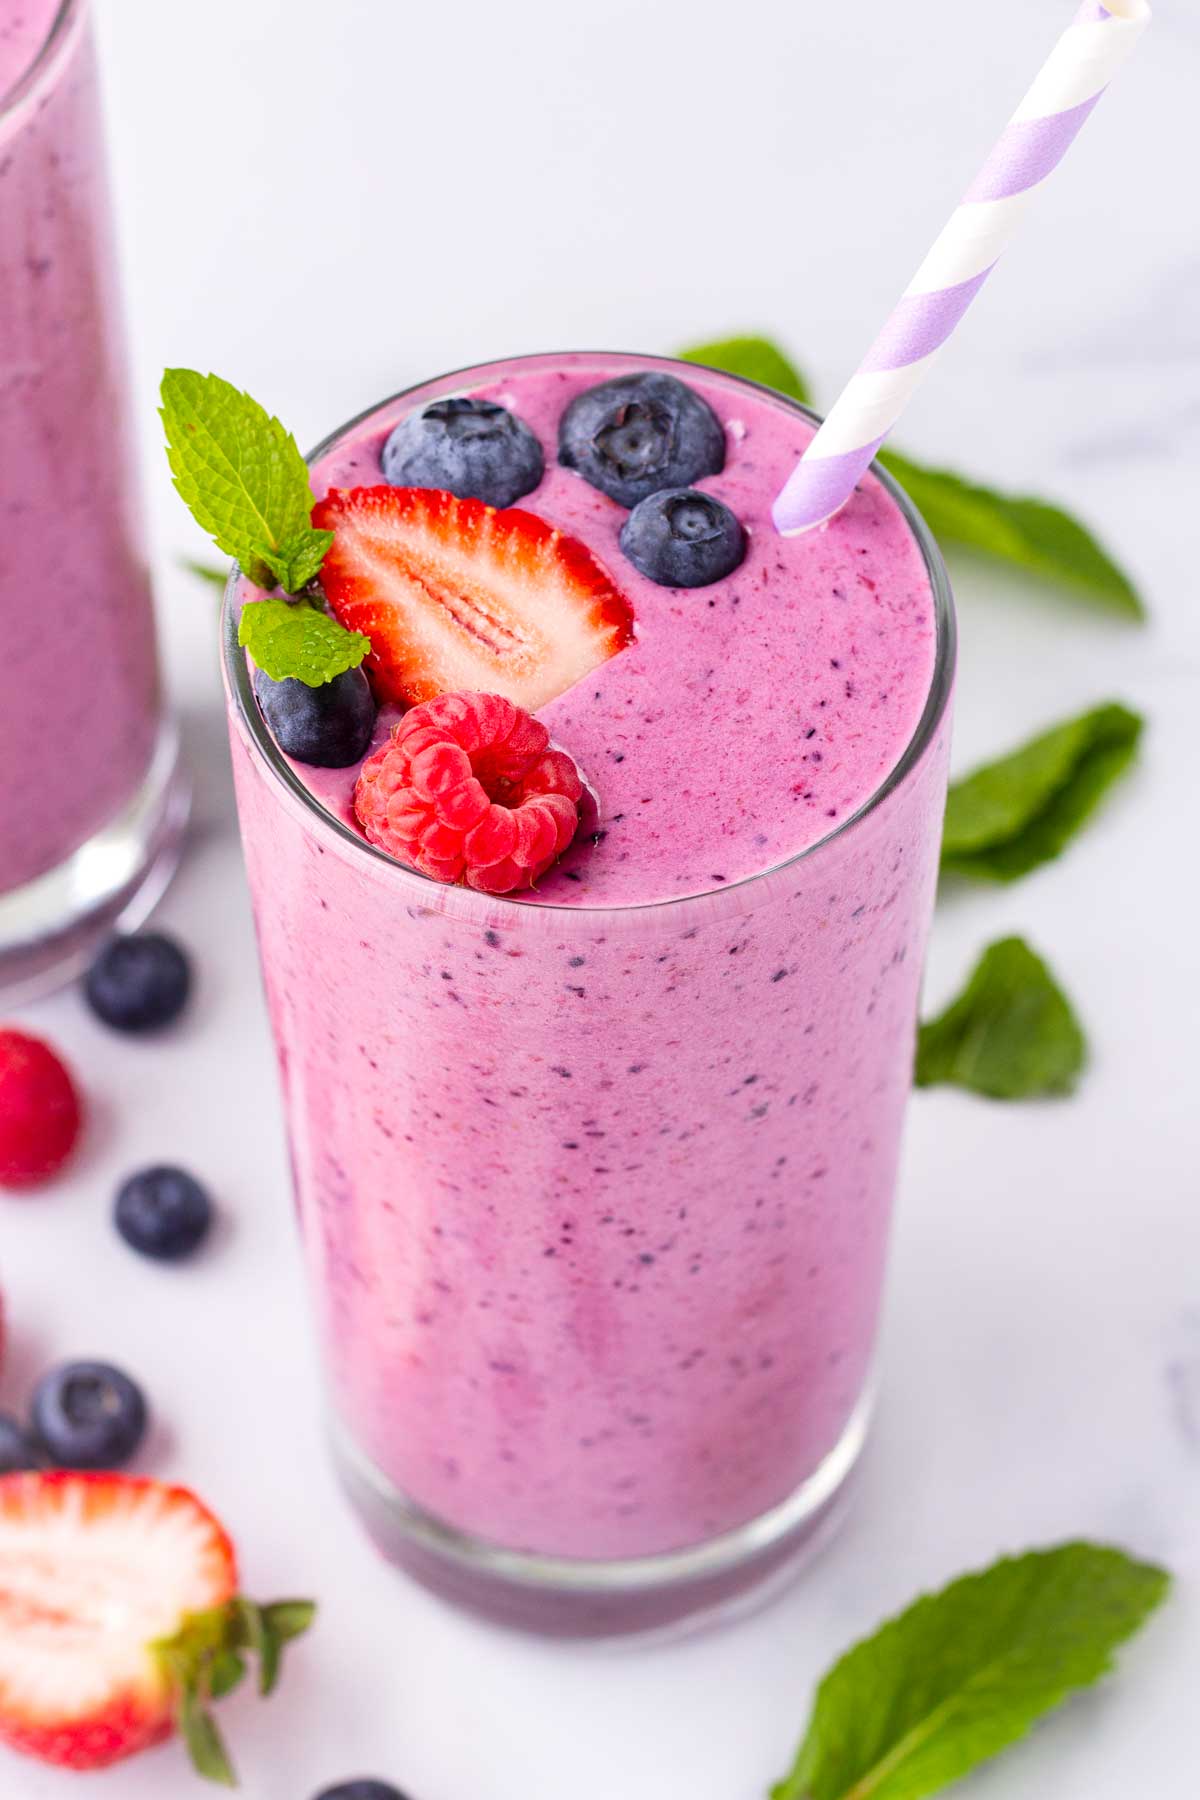 10 Best Magic Bullet Recipes To Try Today - Insanely Good